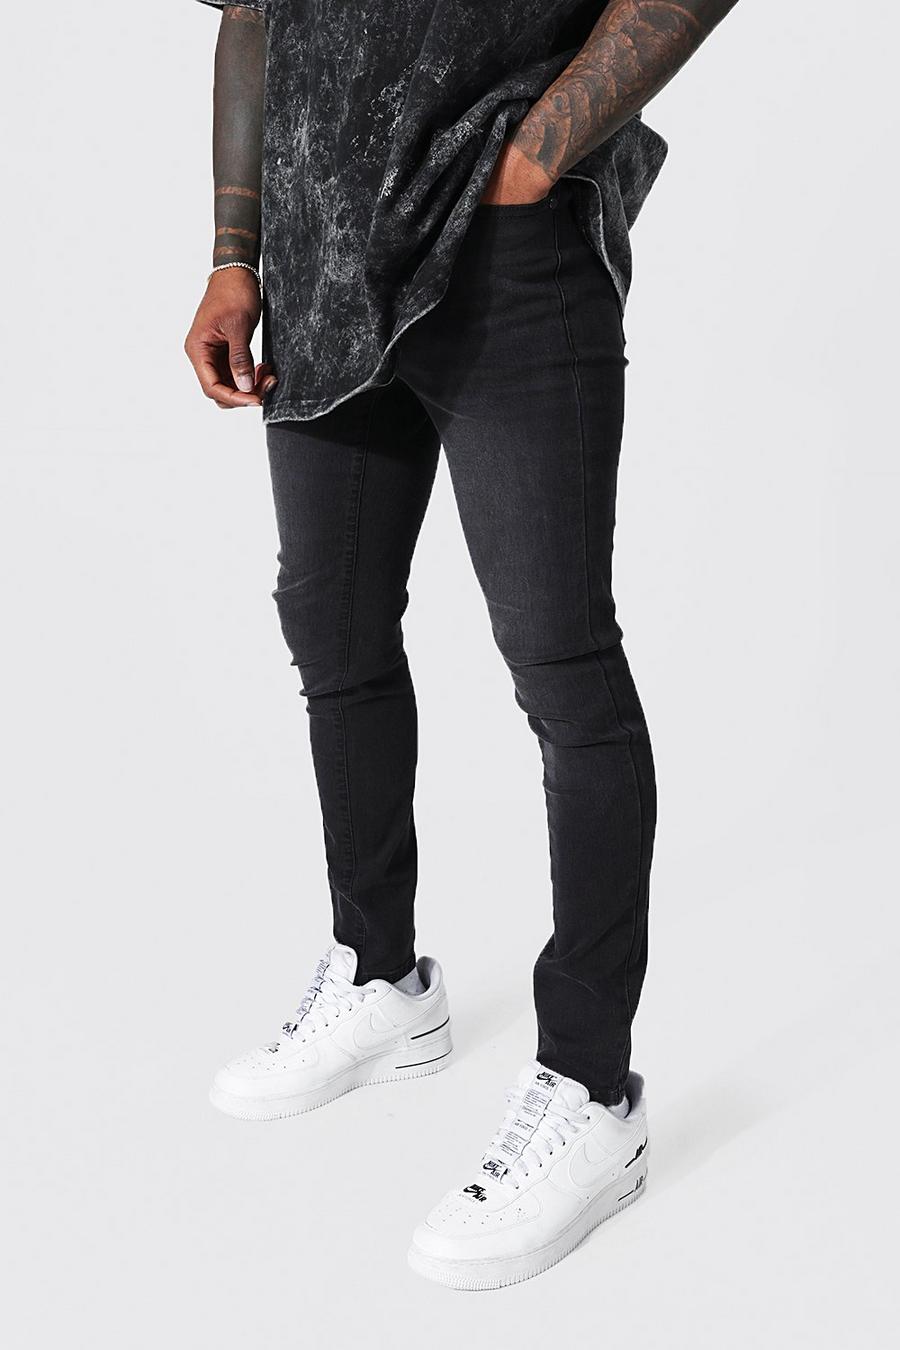 Charcoal grey Super Skinny Fit Jean Contains Organic Cotton